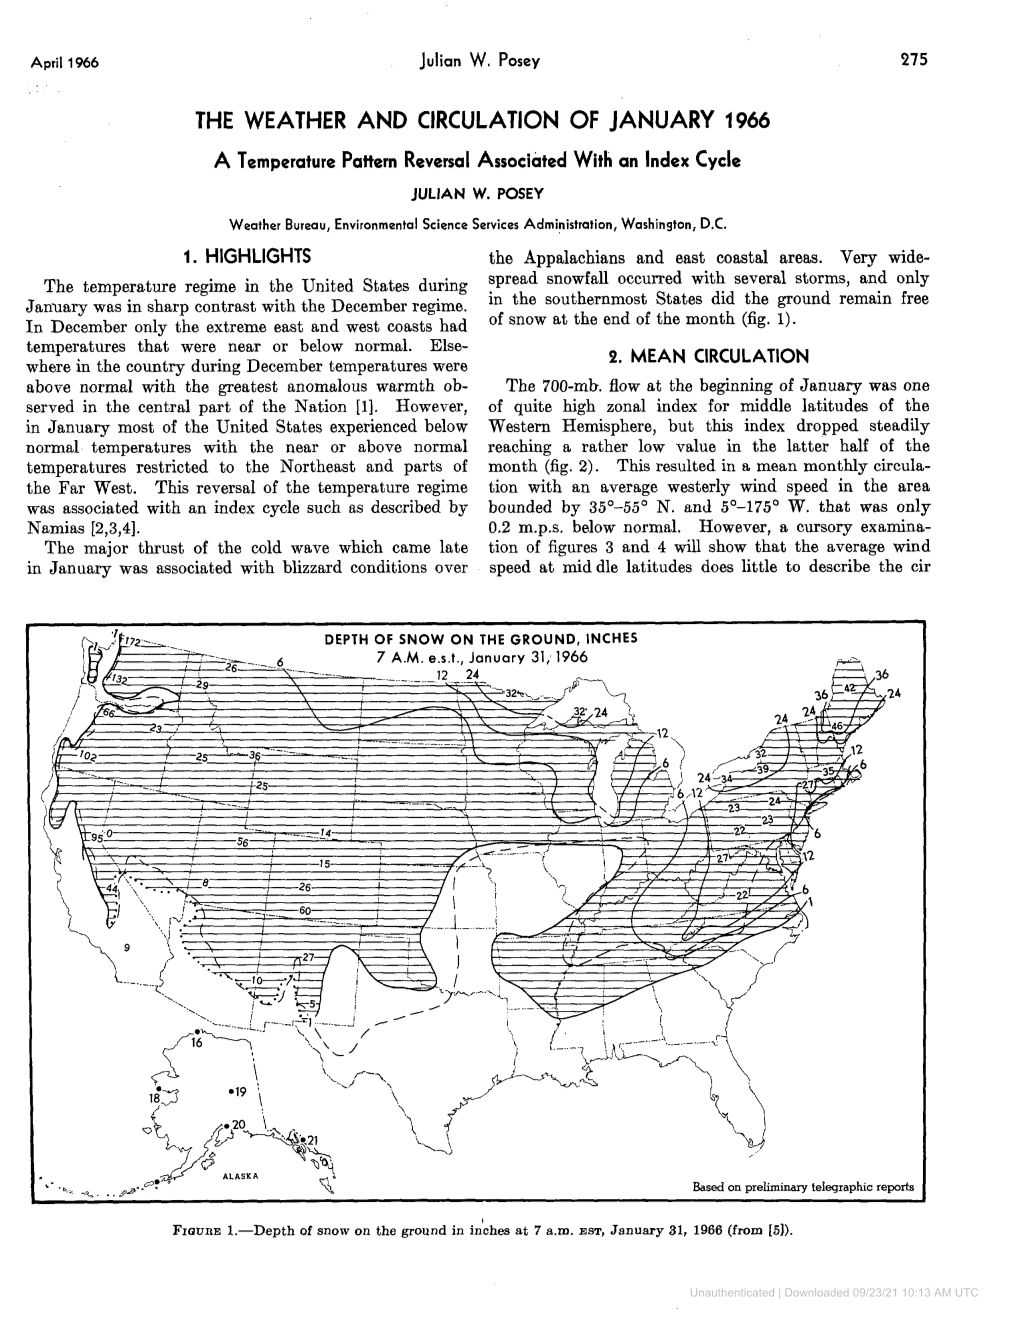 The Weather and Circulation of January 1966